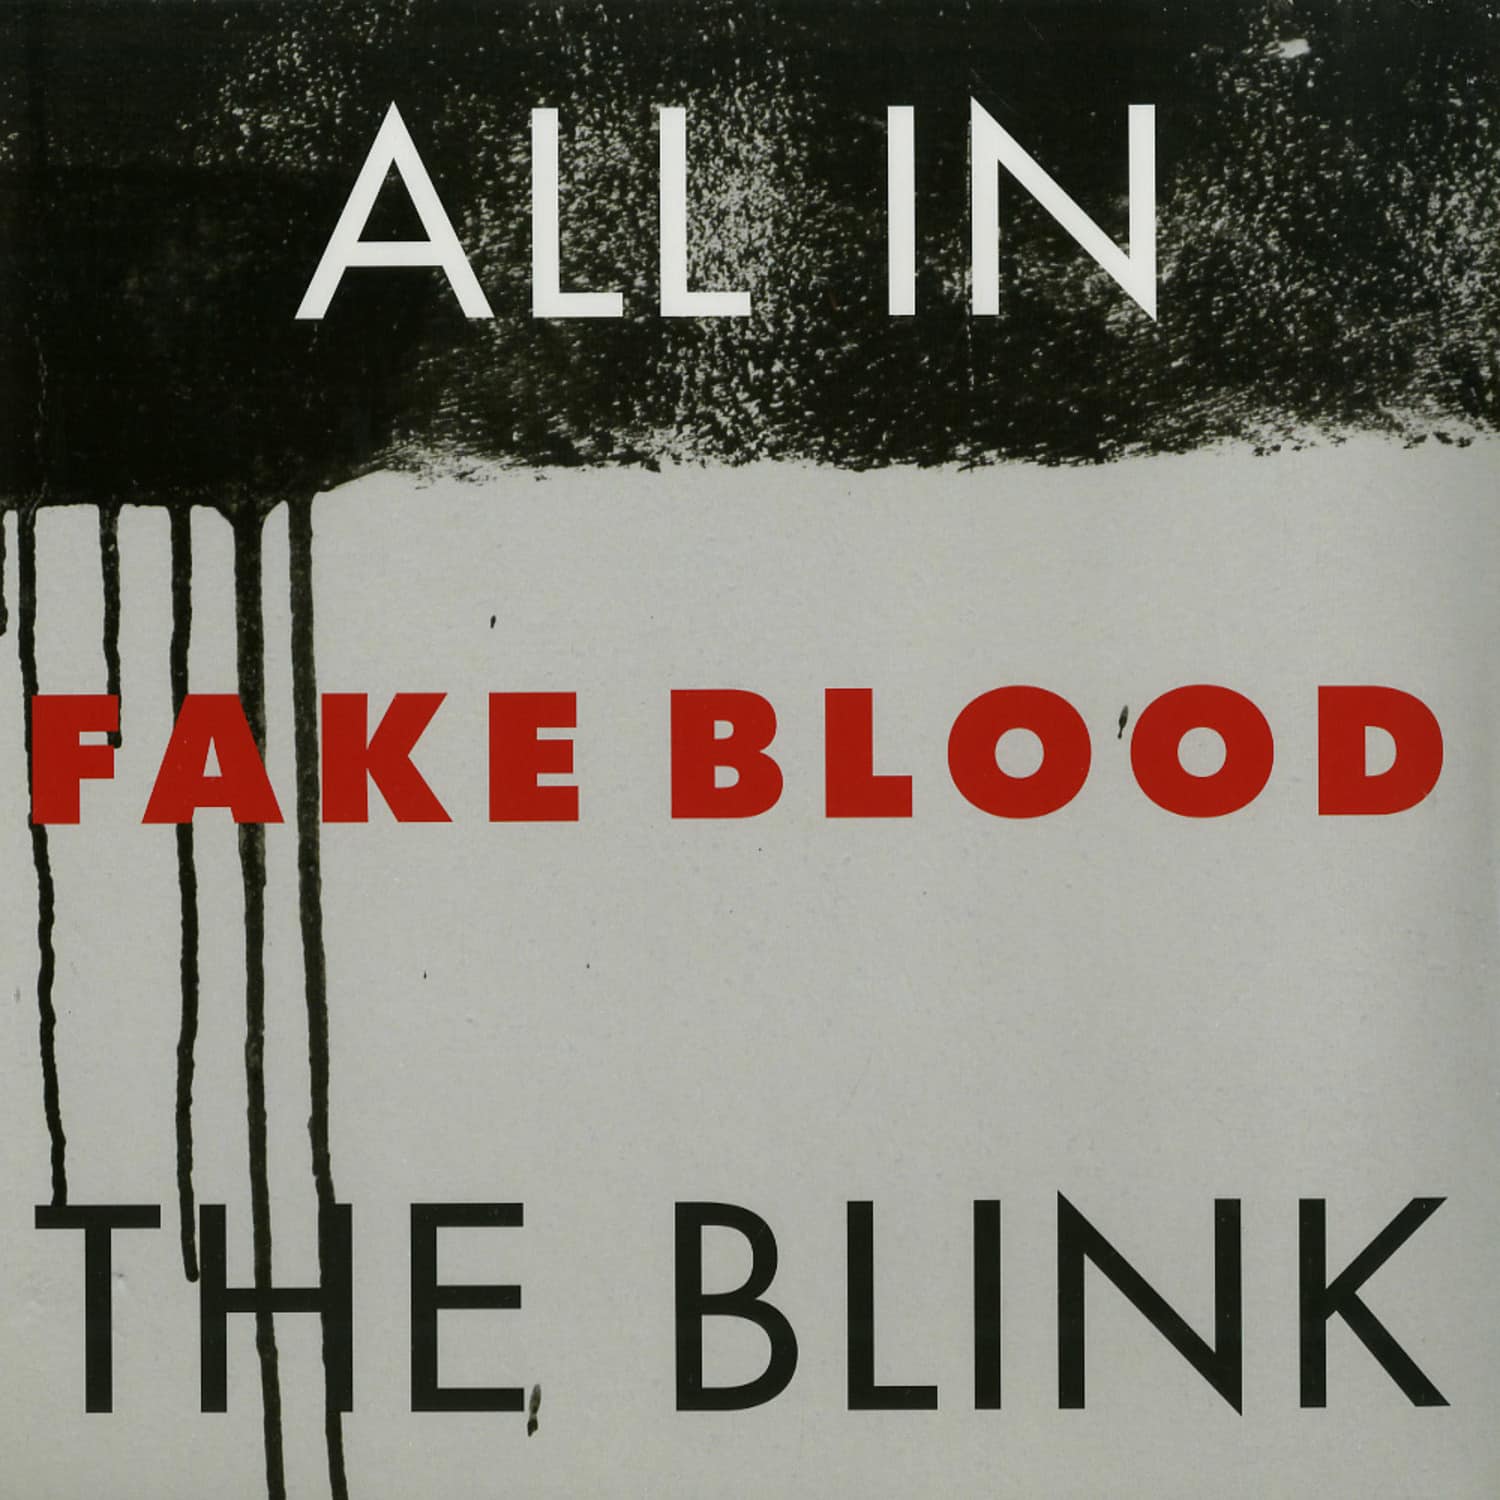 Fake Blood - ALL IN THE BLINK